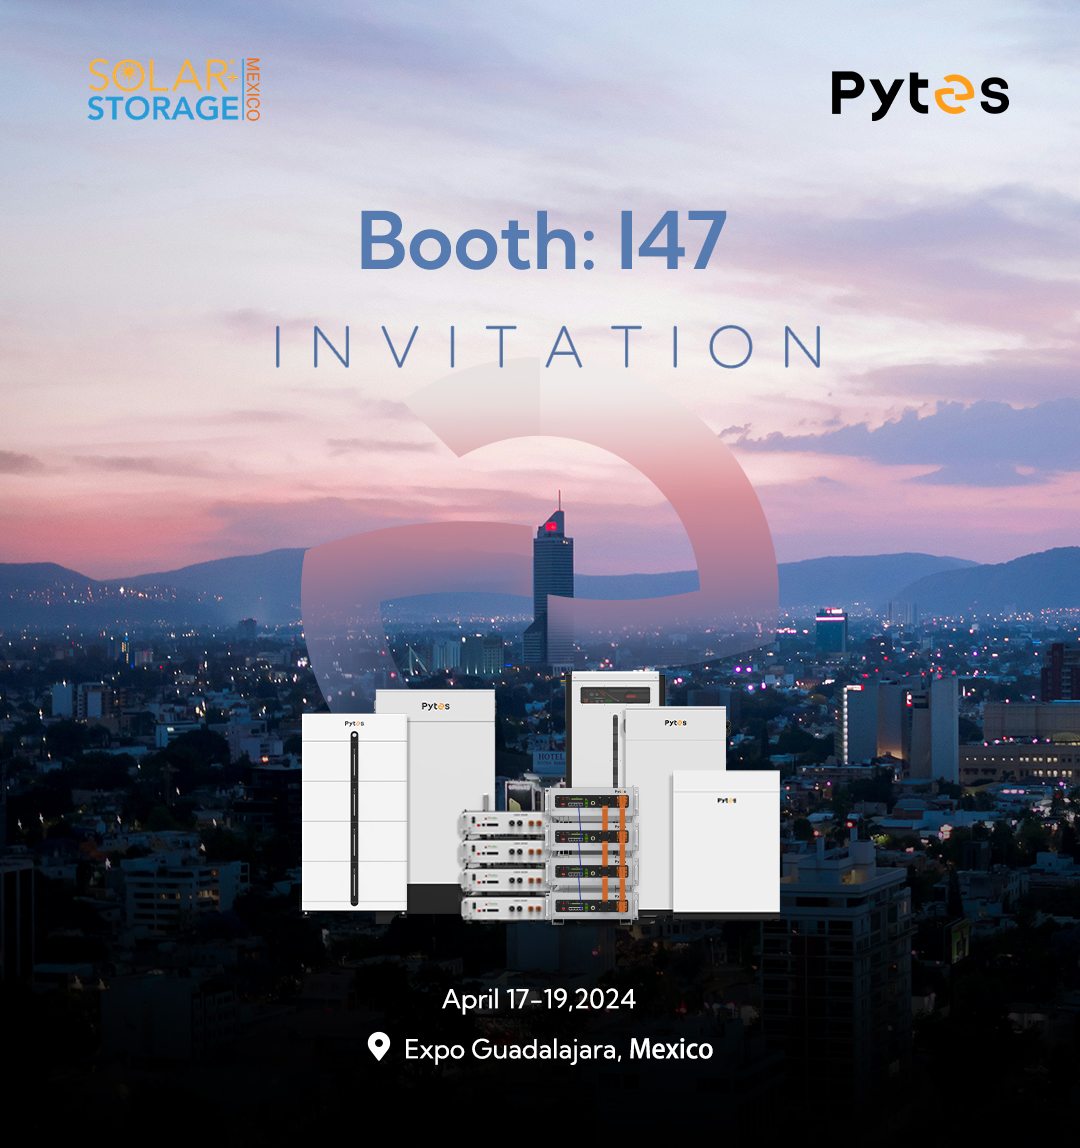 Exciting News! HOLA #Pytes is making its debut at the Solar + Storage Mexico Exhibition, booth I47. 